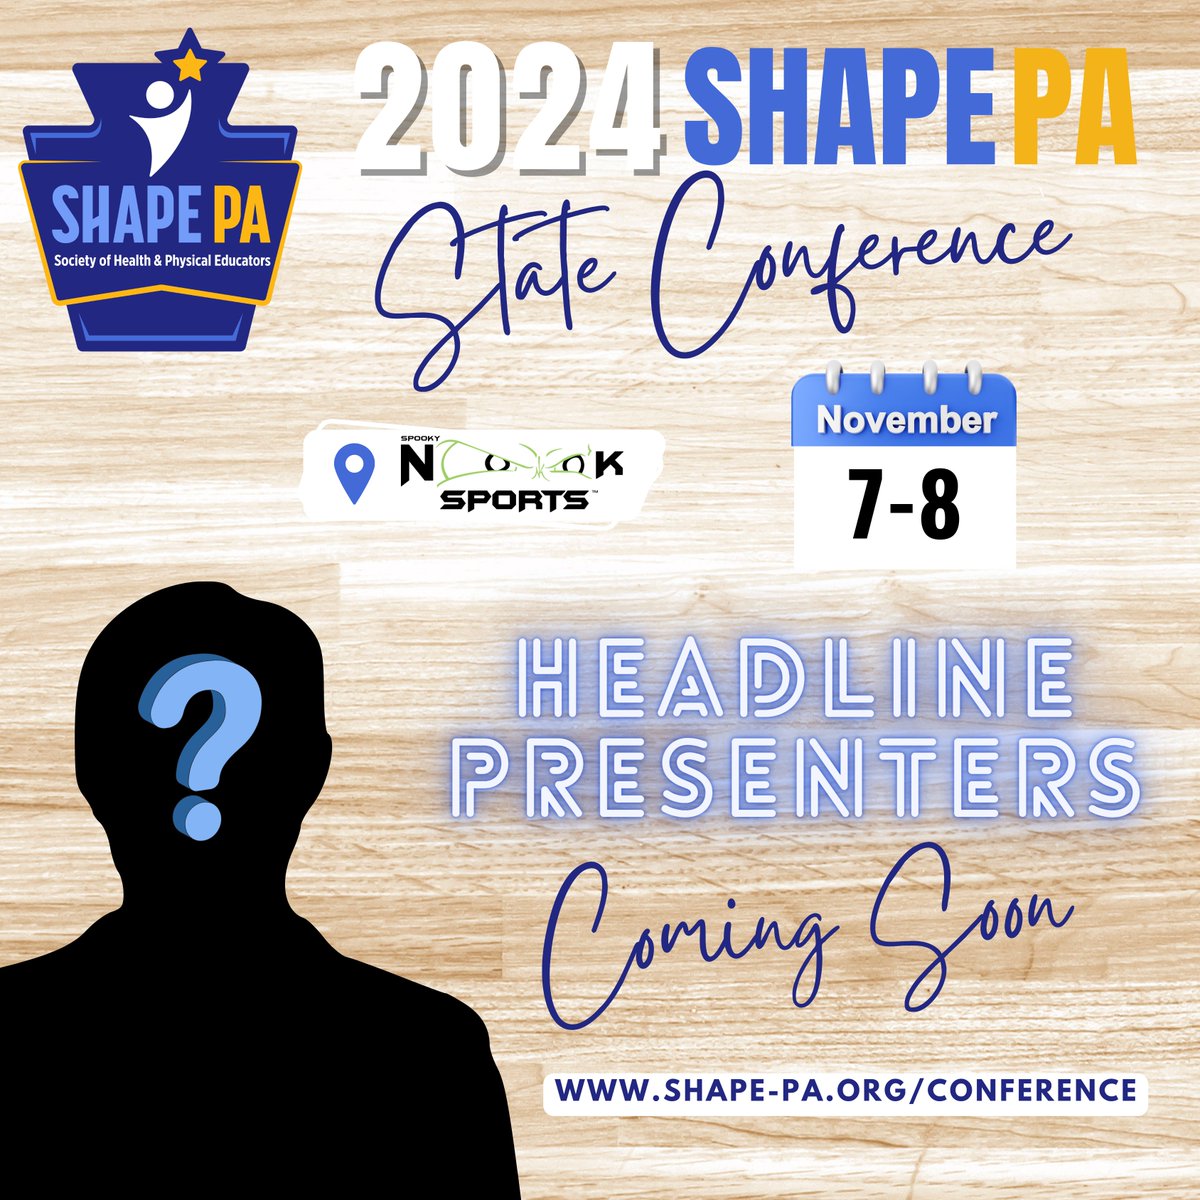 Join us all week as we reveal the headline presenters for the 2024 SHAPE PA State Conference! 🎆 Our first headliner will be unveiled tomorrow morning (4/22), followed by a new announcement each day. Get ready for an amazing lineup! #SHAPEPA2024 @SHAPEAmerica_ED @SHAPE_America